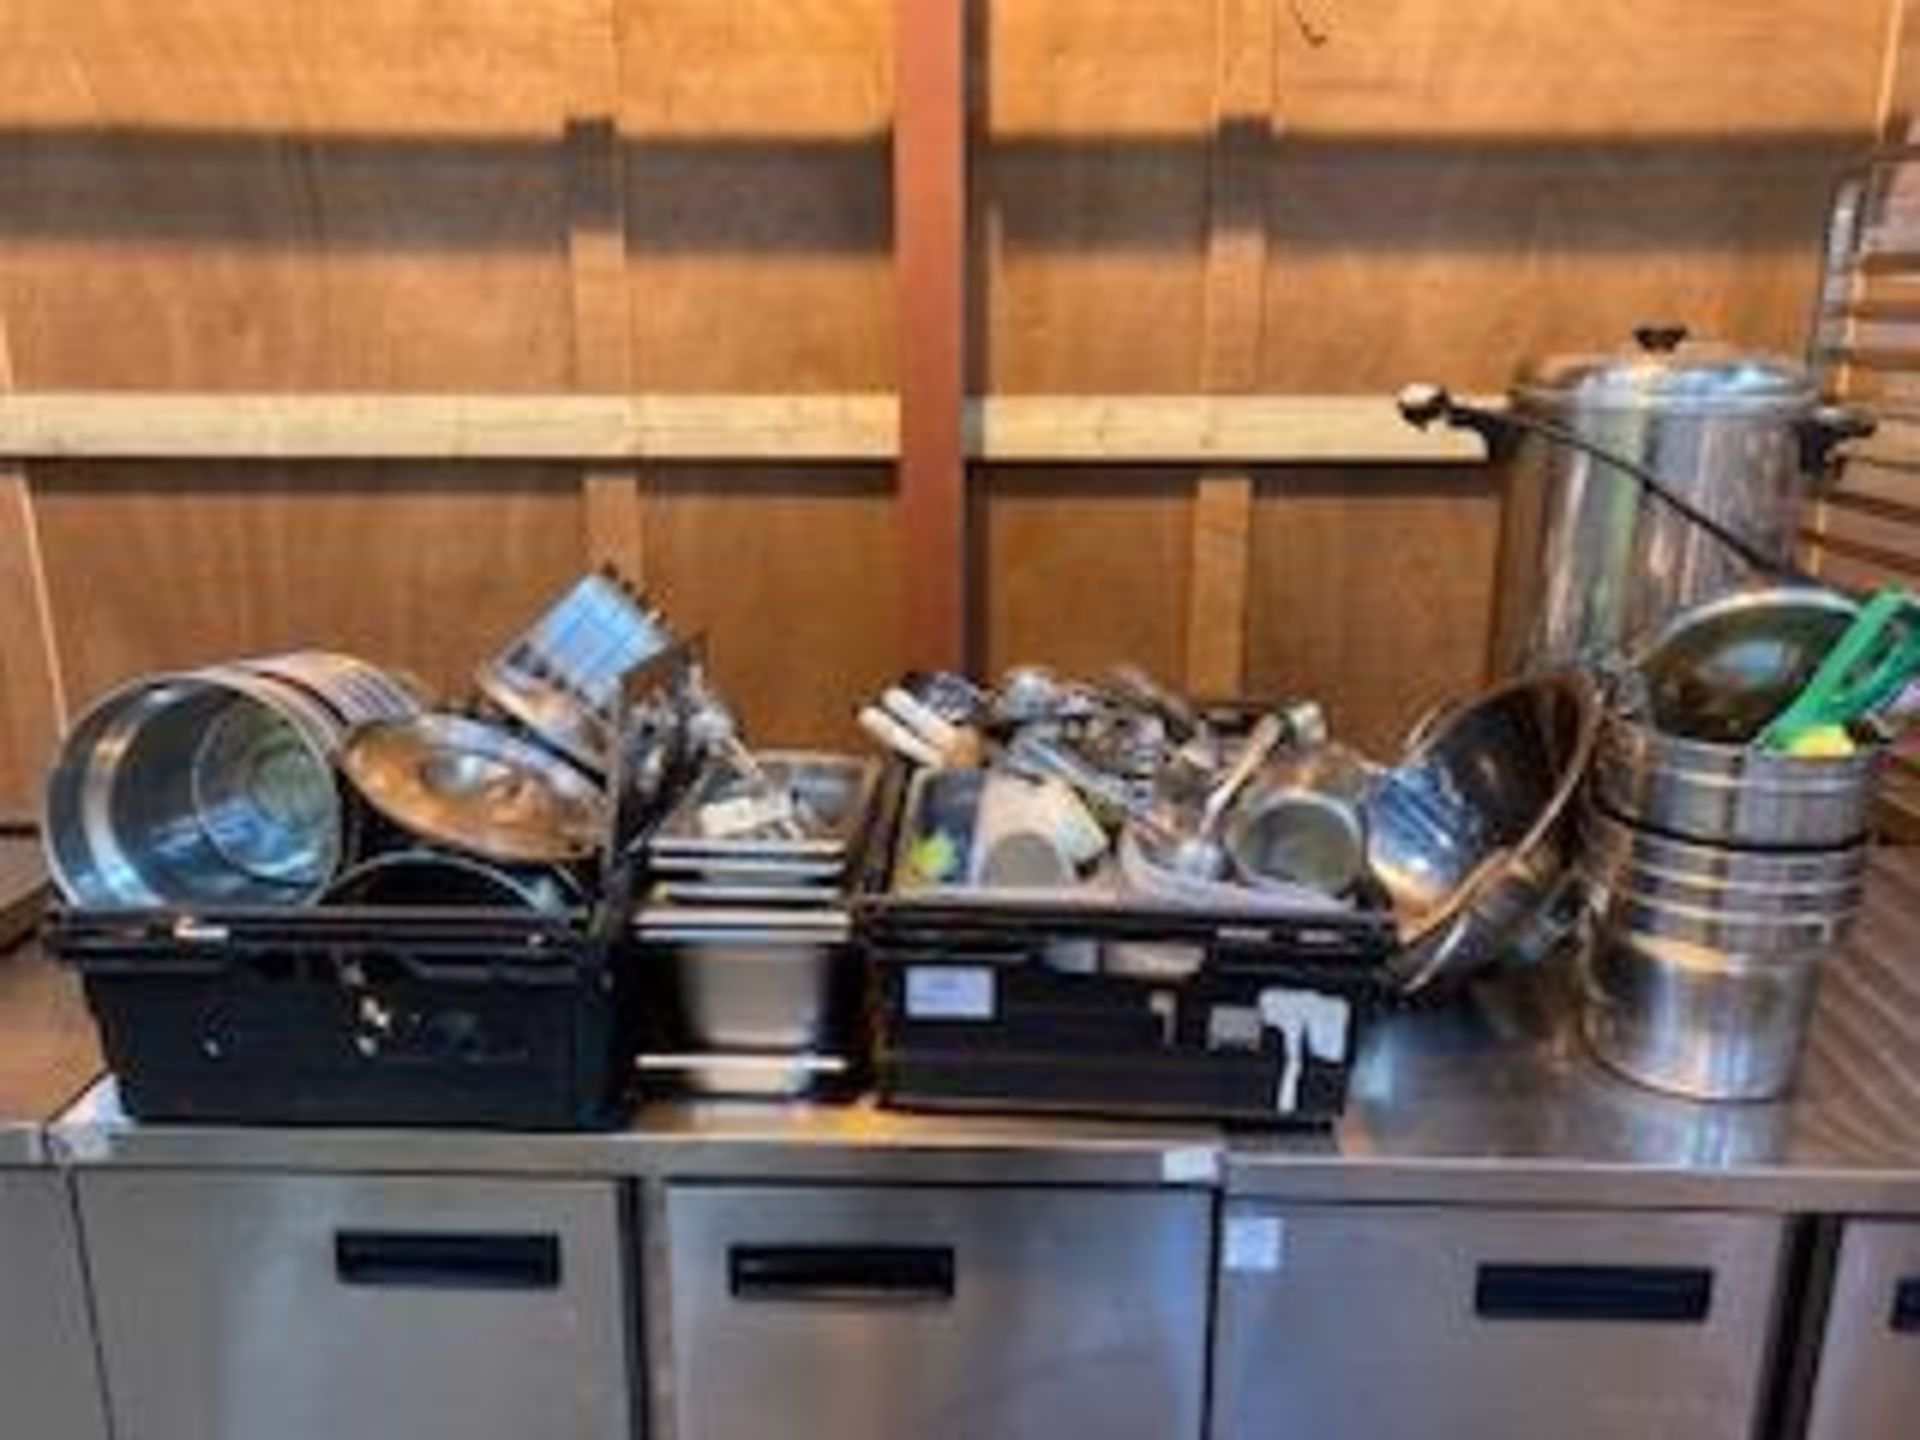 Quantity of Stainless Steel Gastronorm Containers, Utensils, Buffalo CC191 Water Boiler